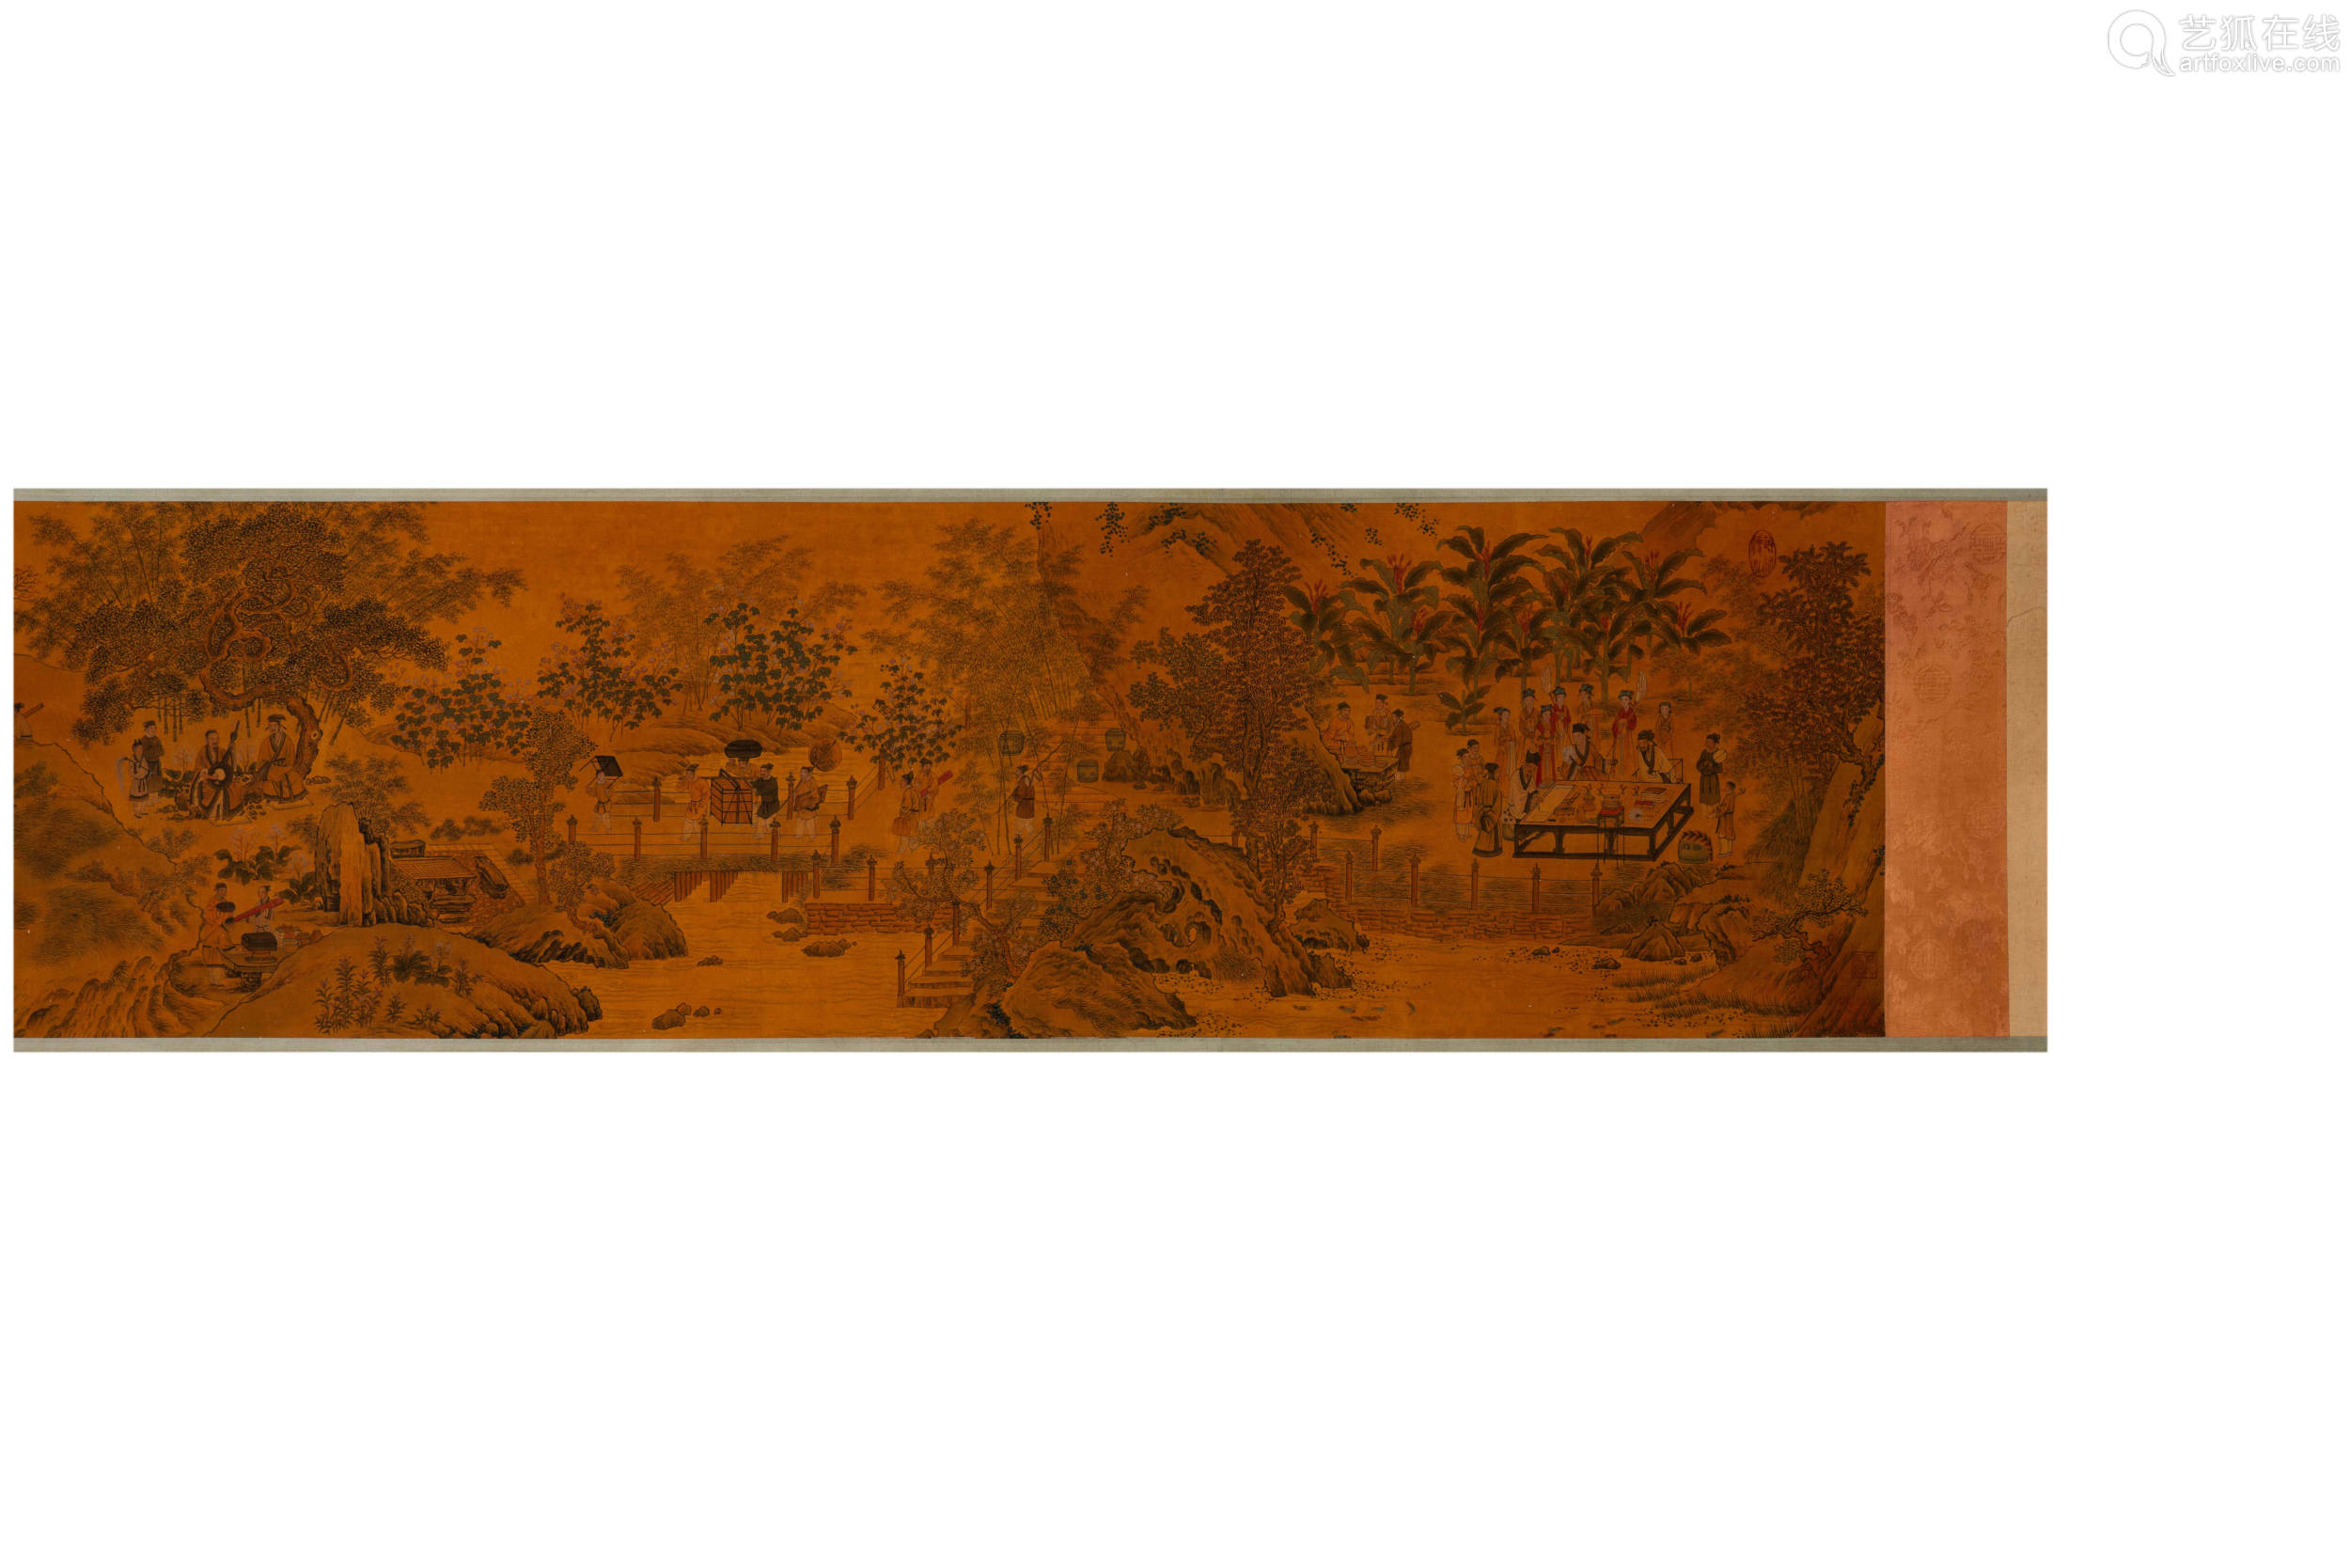 Zhao Mengfu's calligraphy and painting collection